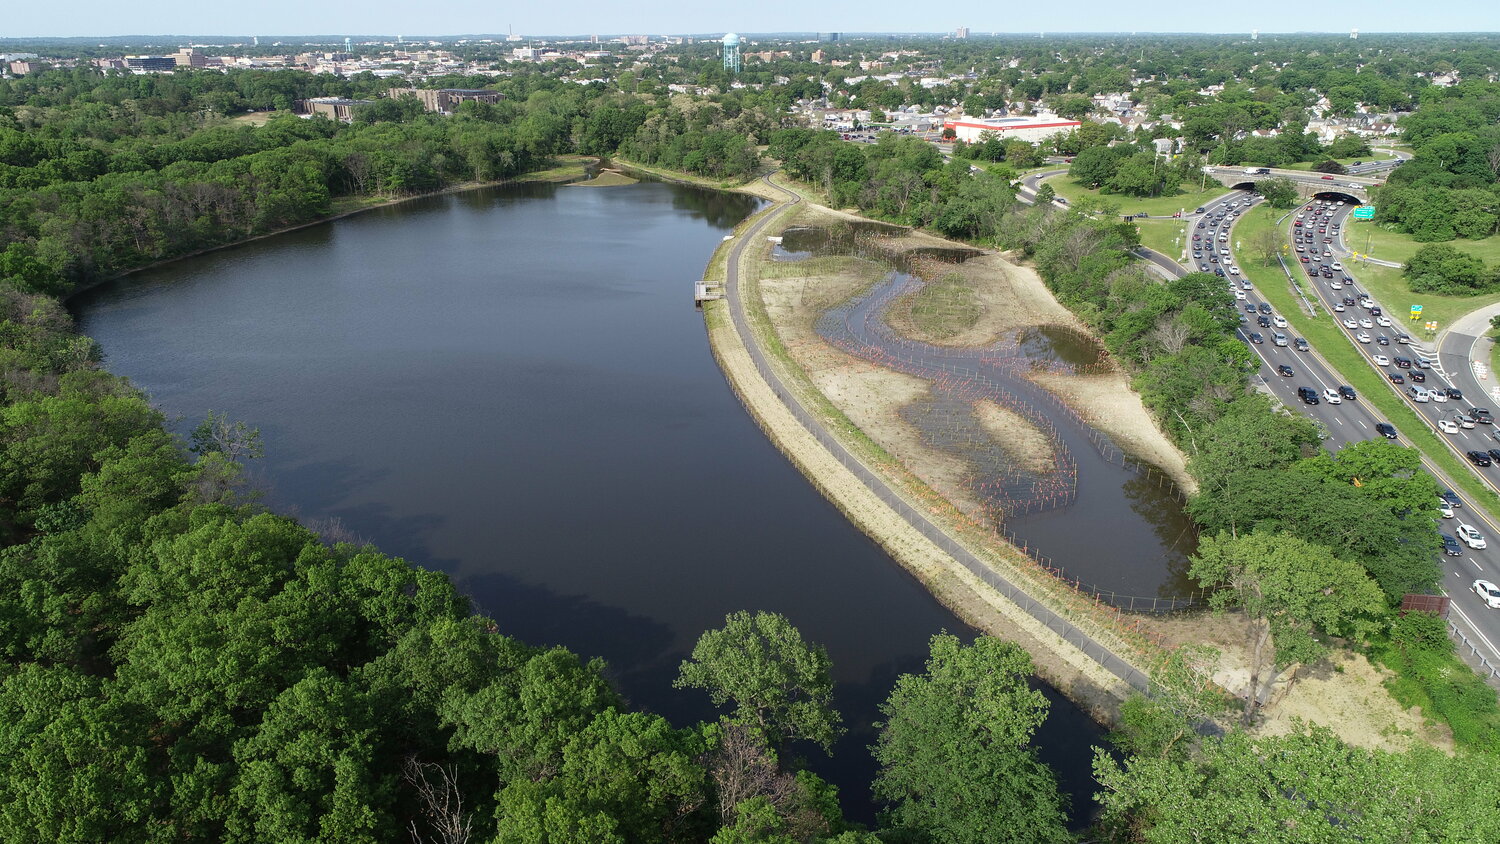 The Park has new shoreline and wetlands protection.